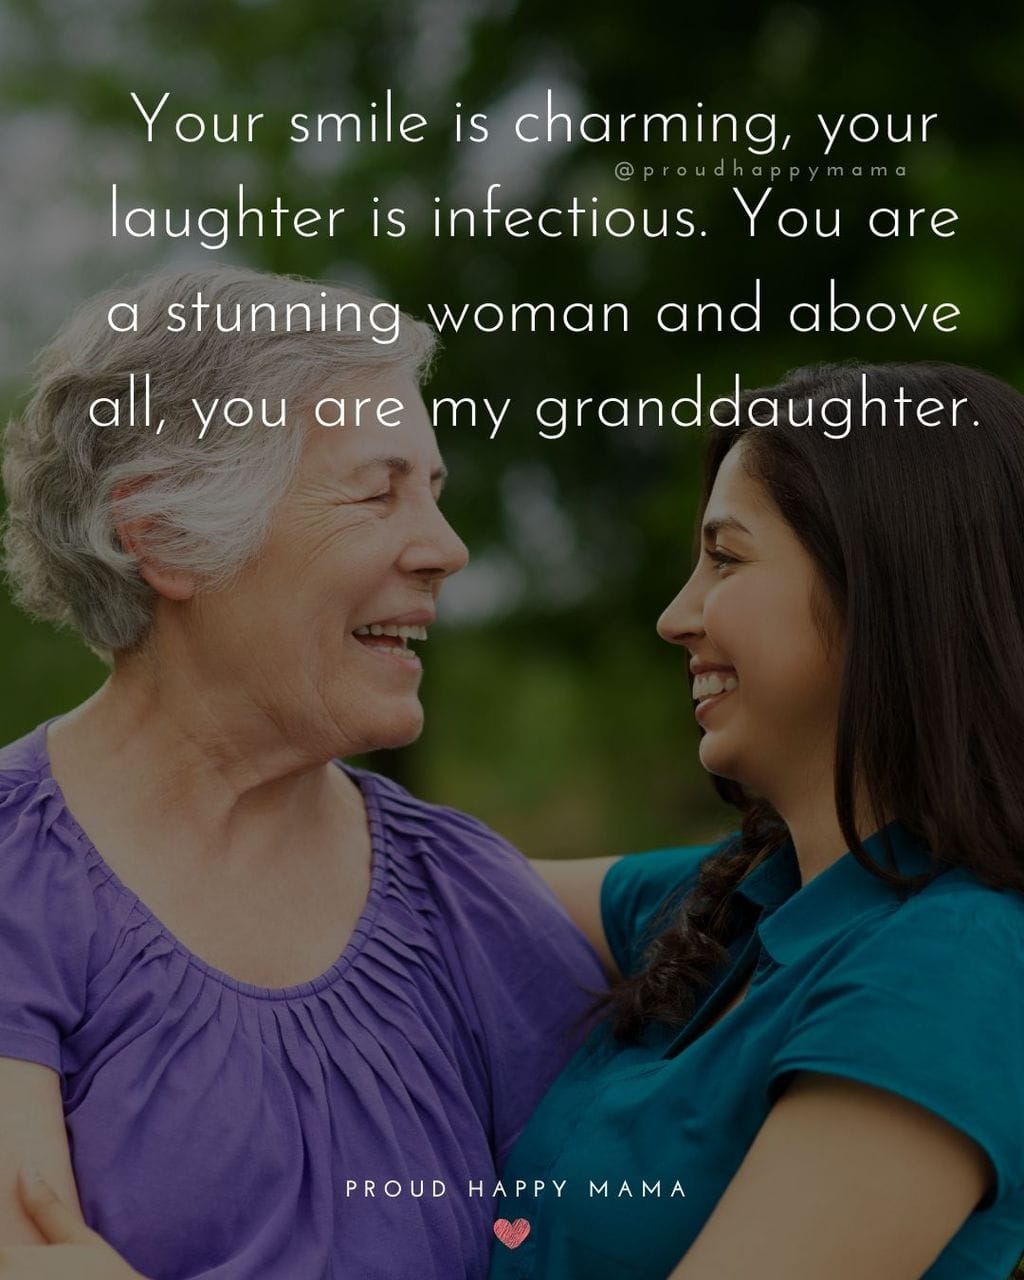 Adult granddaughter looking at grandmother whilst arms around each other, with text overlay, ‘Your smile is charming, your laughter is infectious. You are a stunning woman and above all, you are my granddaughter.’